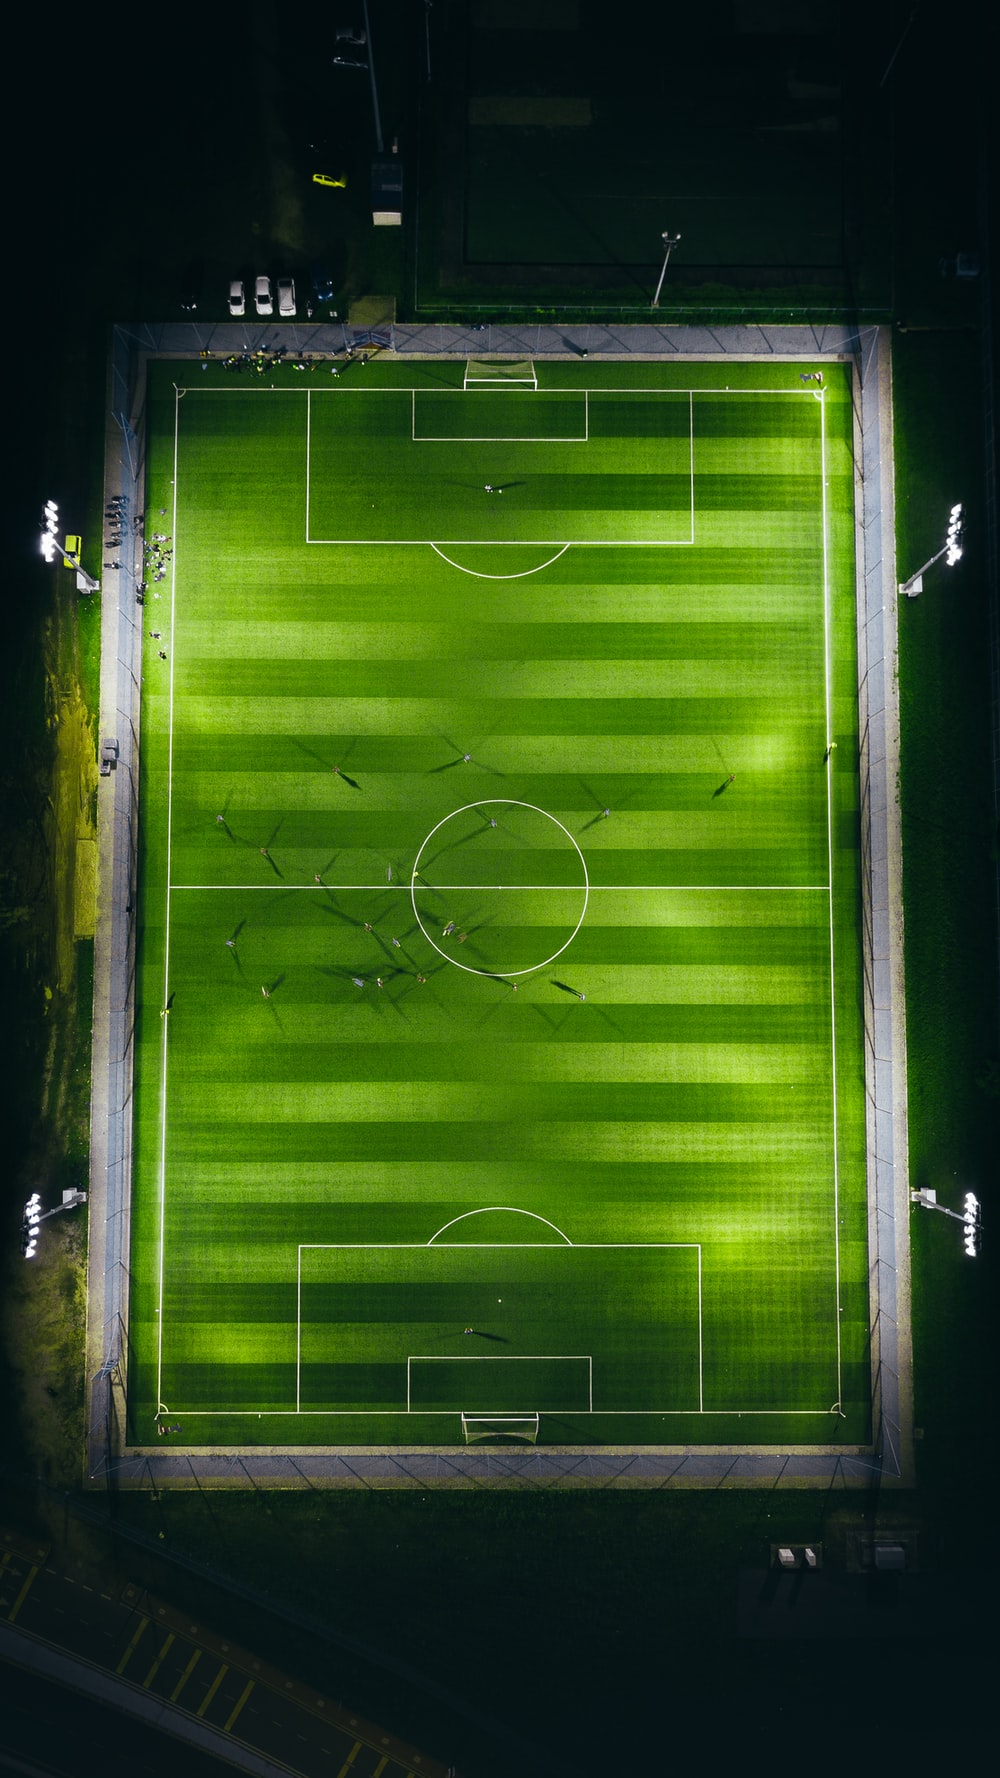 Soccer Stadium Picture. Download Free Image